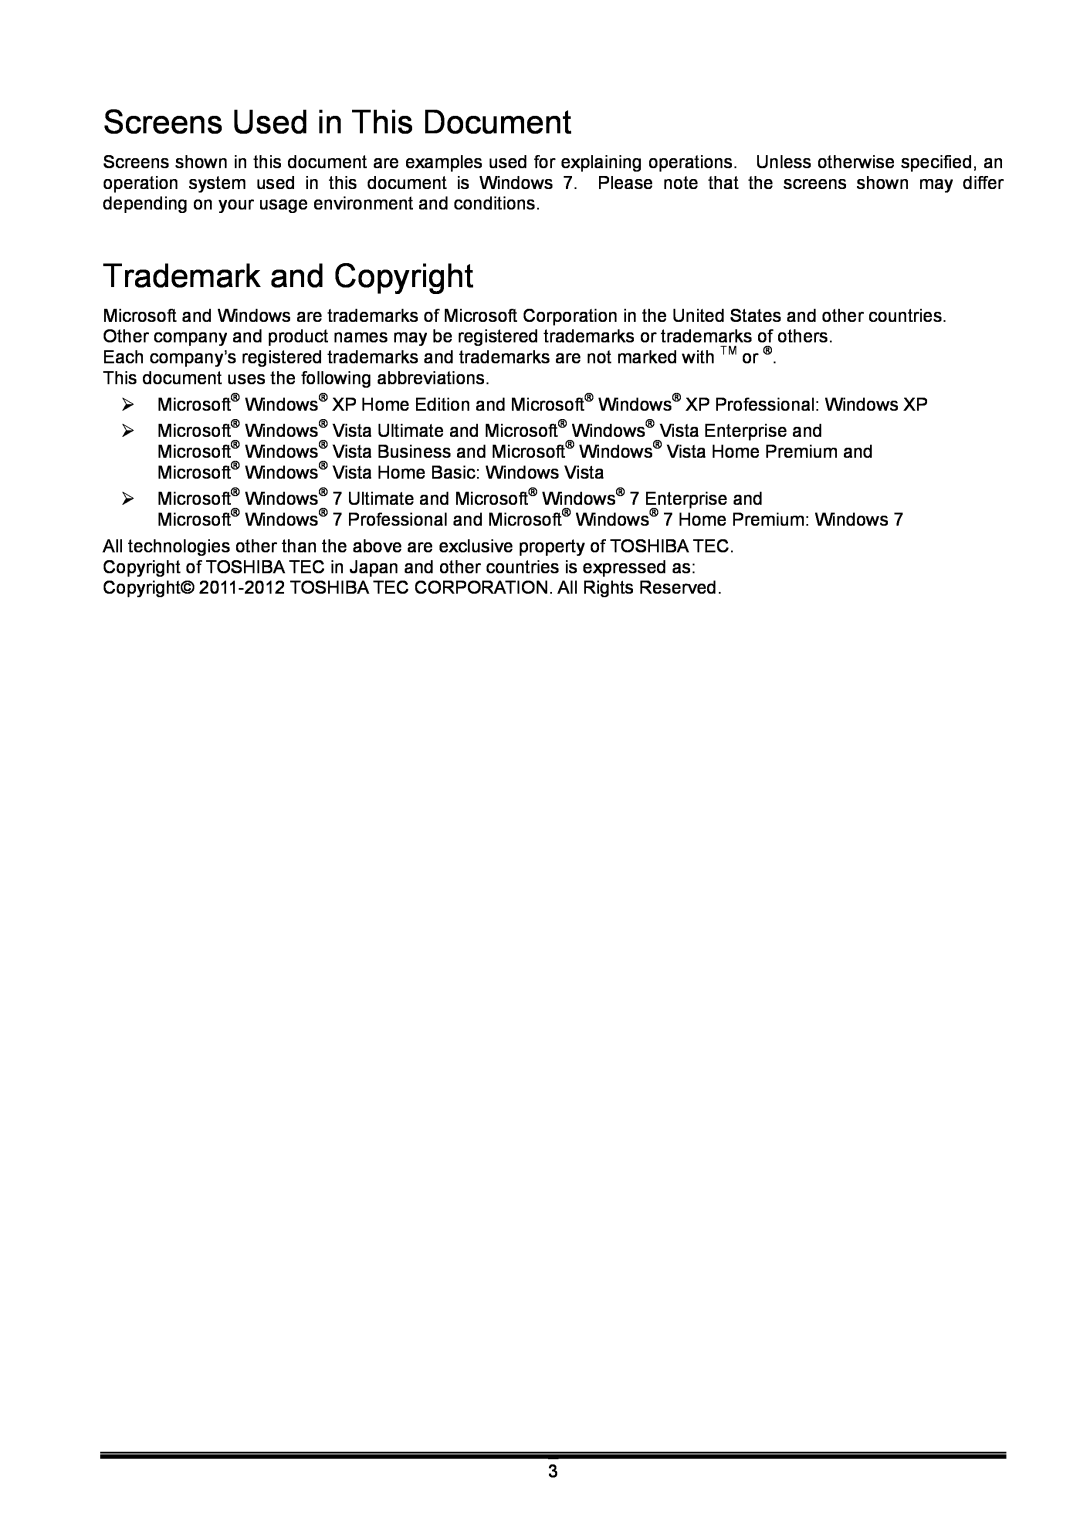 Toshiba B-EX operation manual Screens Used in This Document, Trademark and Copyright 